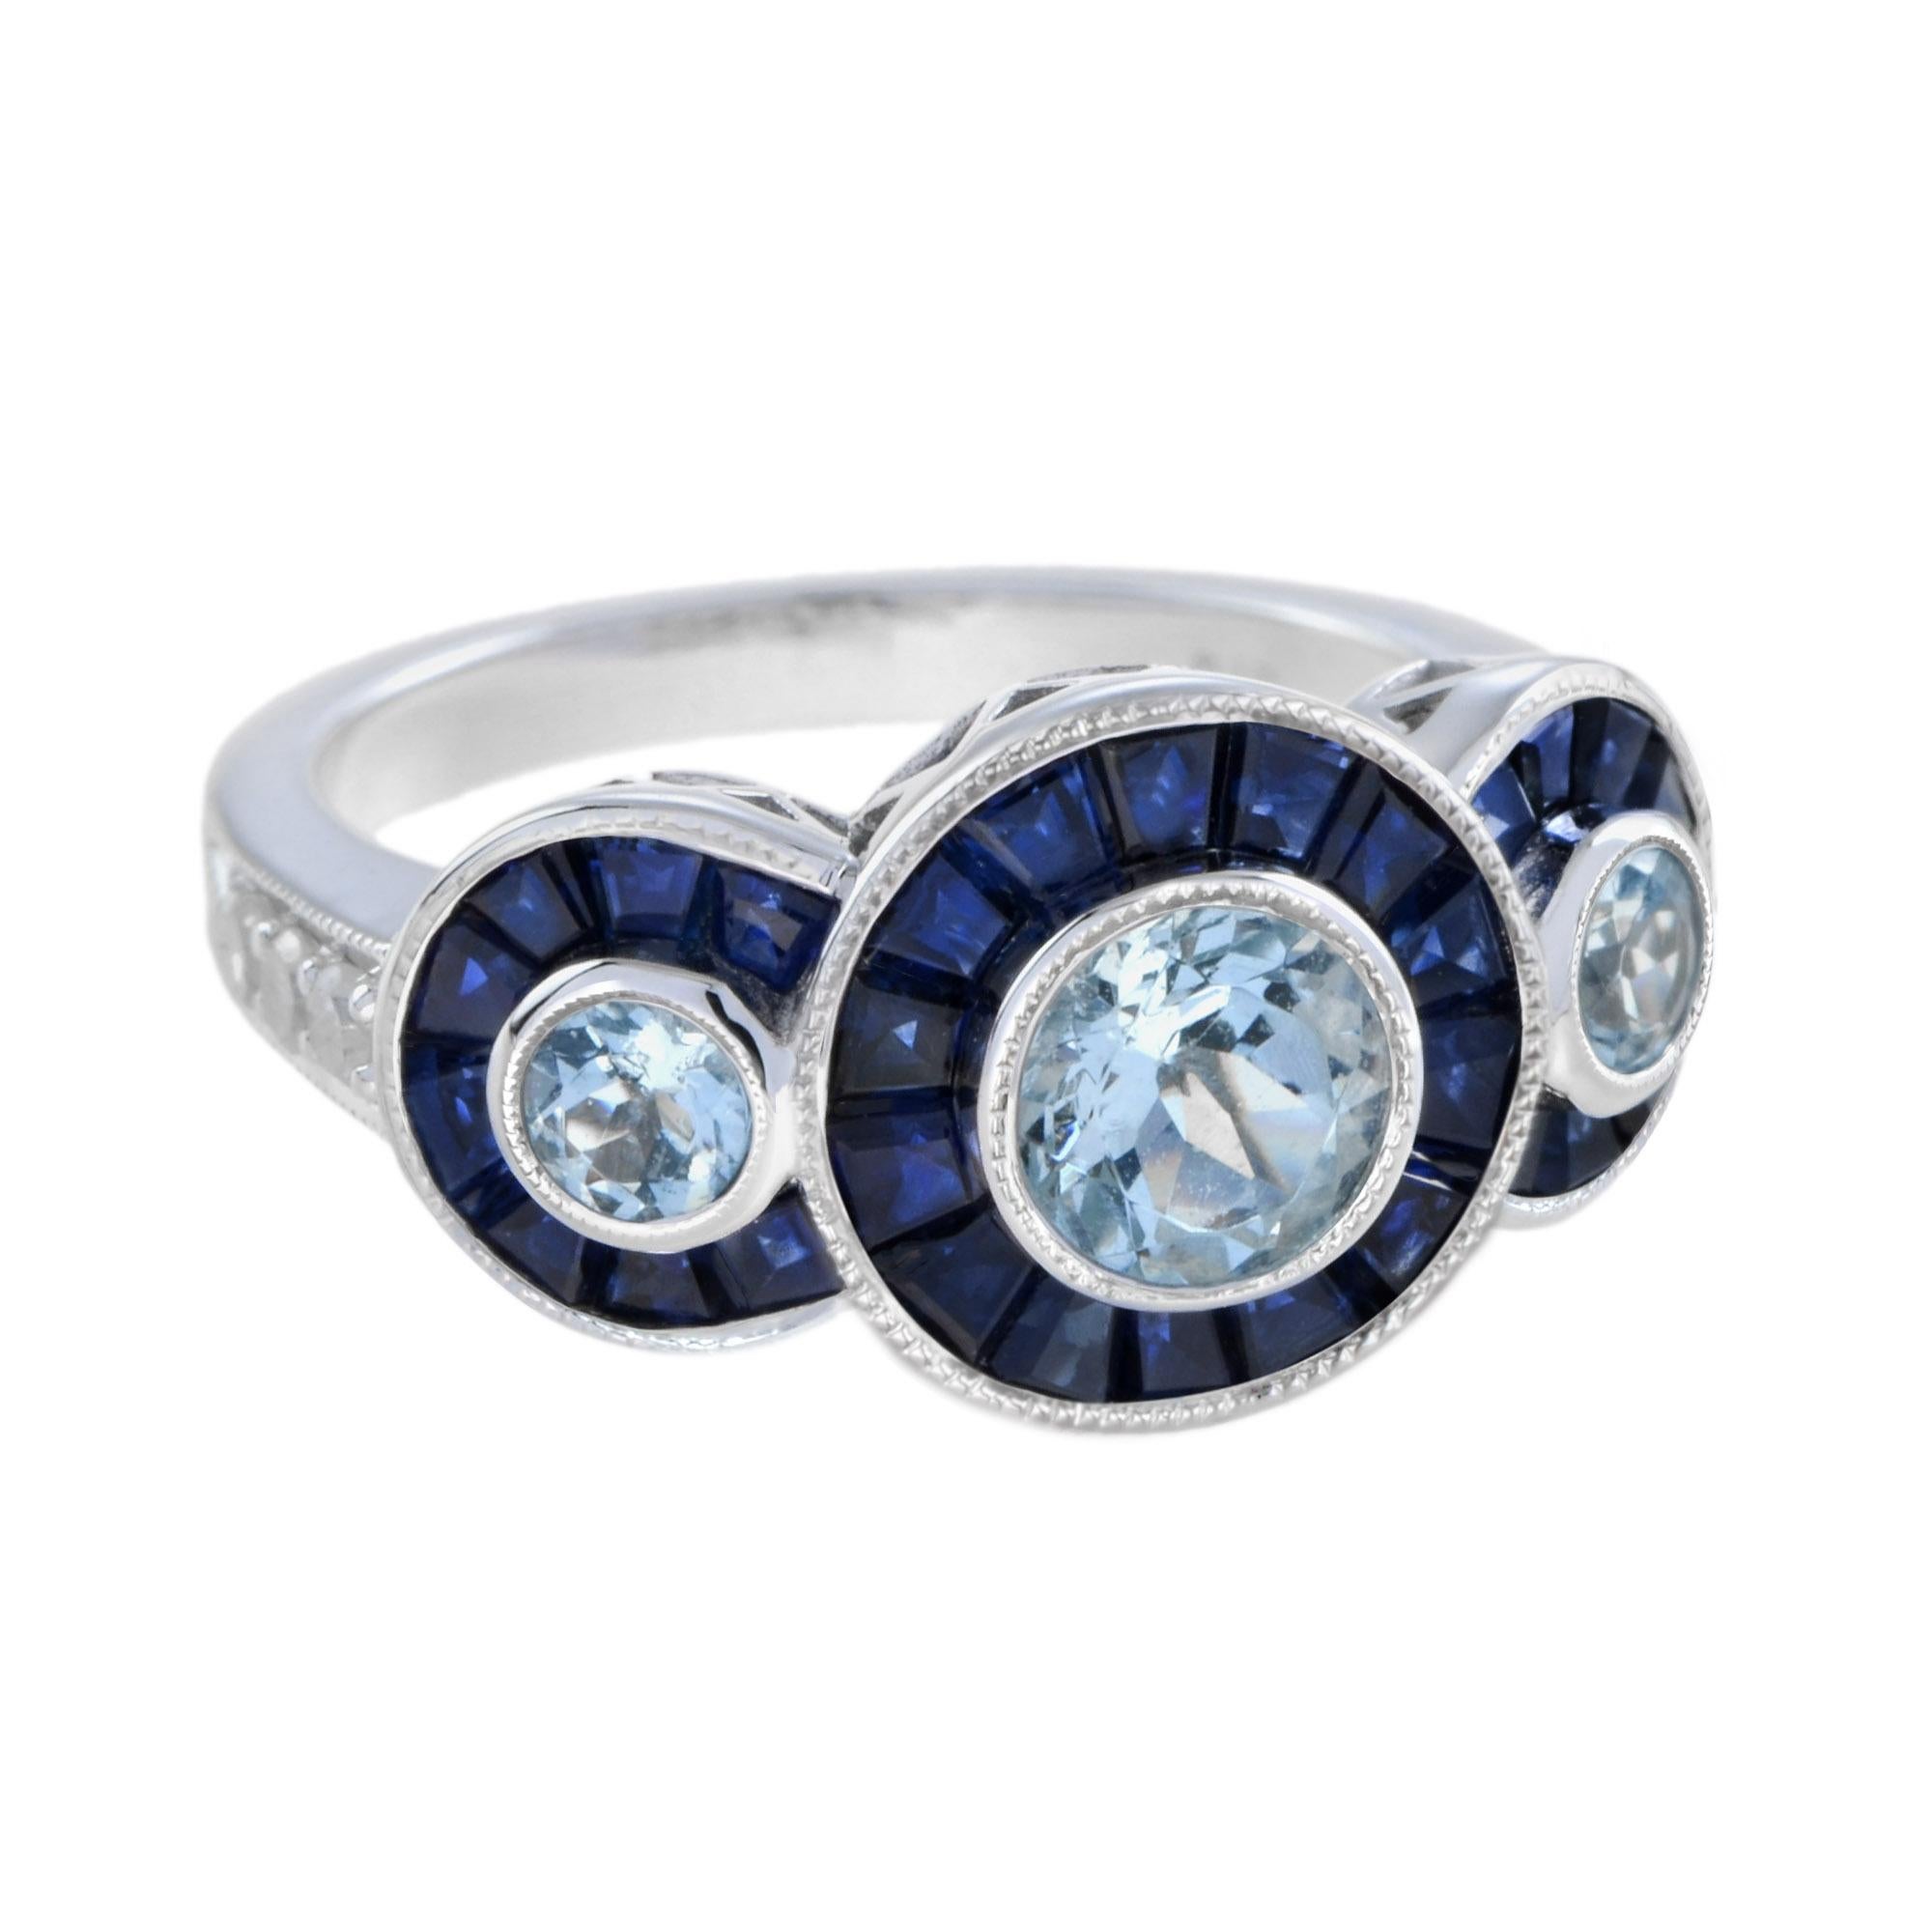 This stunning antique design ring features three bezel set round aquamarine bordered with thirty calibre cut natural blue sapphires. The top face of the shank is accented with six round cut diamonds. The ring makes a nice statement on the hand.
Ring